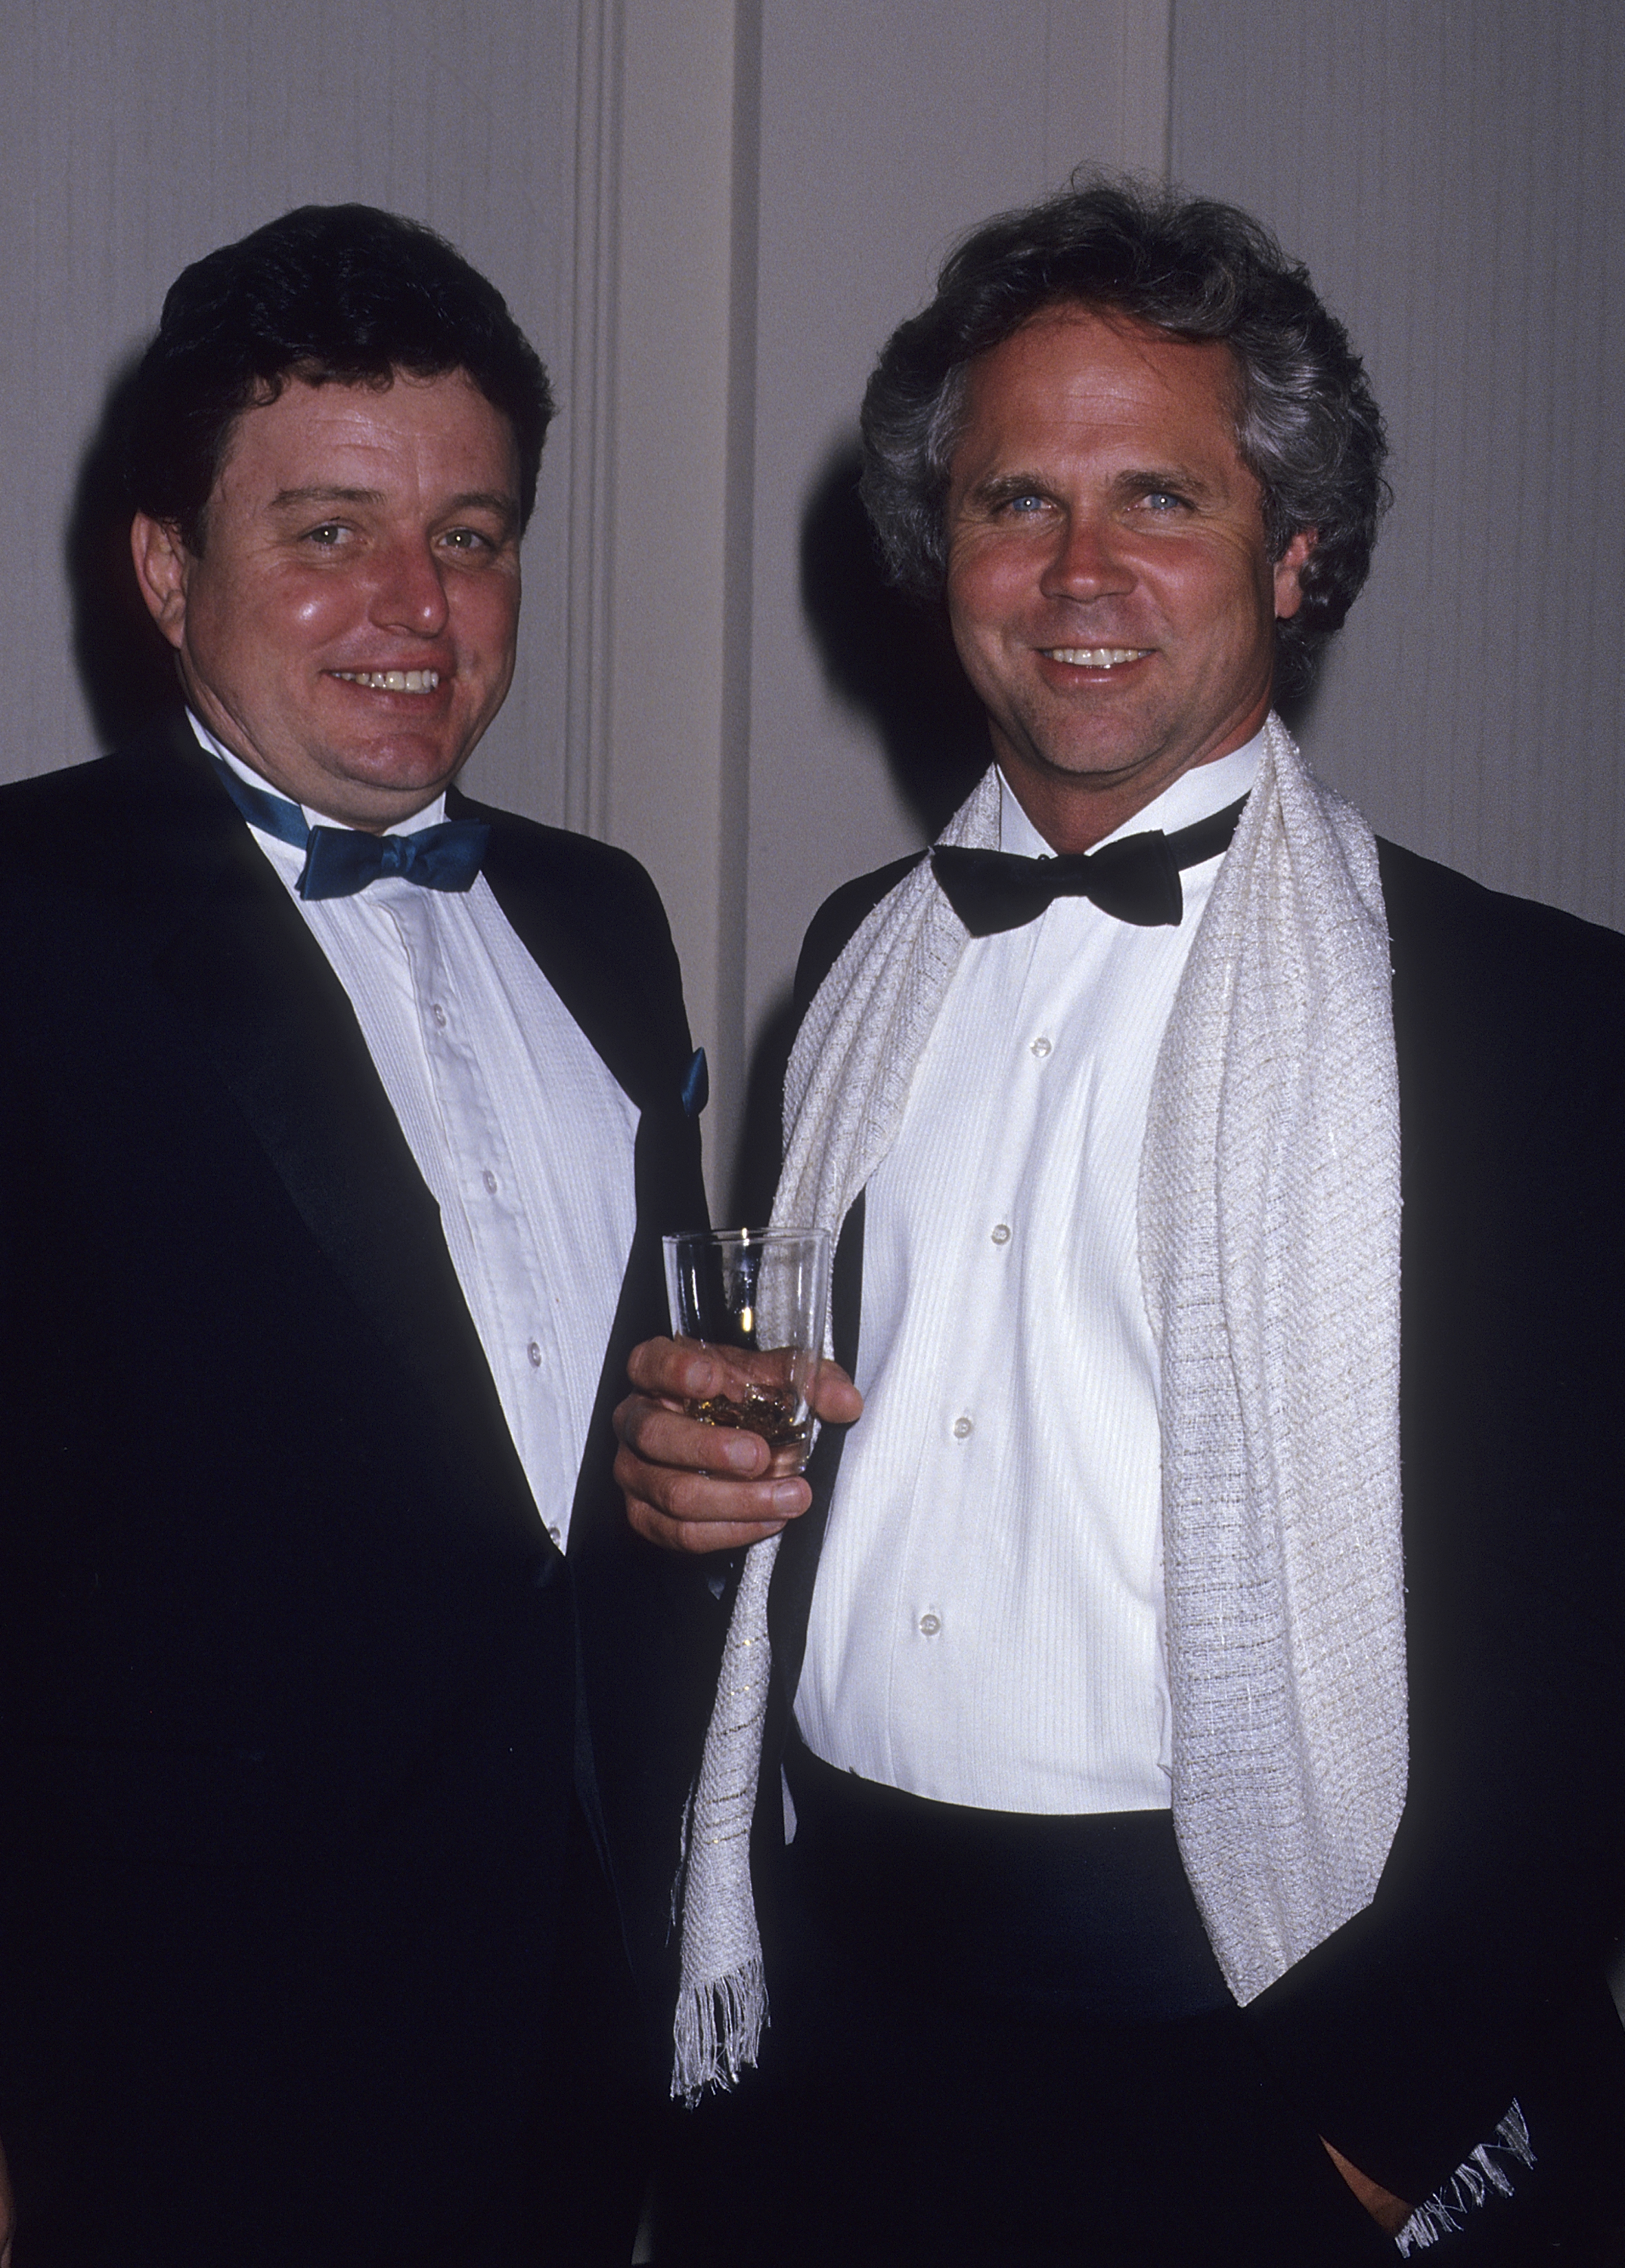 Jerry Mathers and Tony Dow attend the Hollywood Radio & Television Society's 27th Annual International Broadcasting Awards on March 17, 1987 in Century City, California | Source: Getty Images